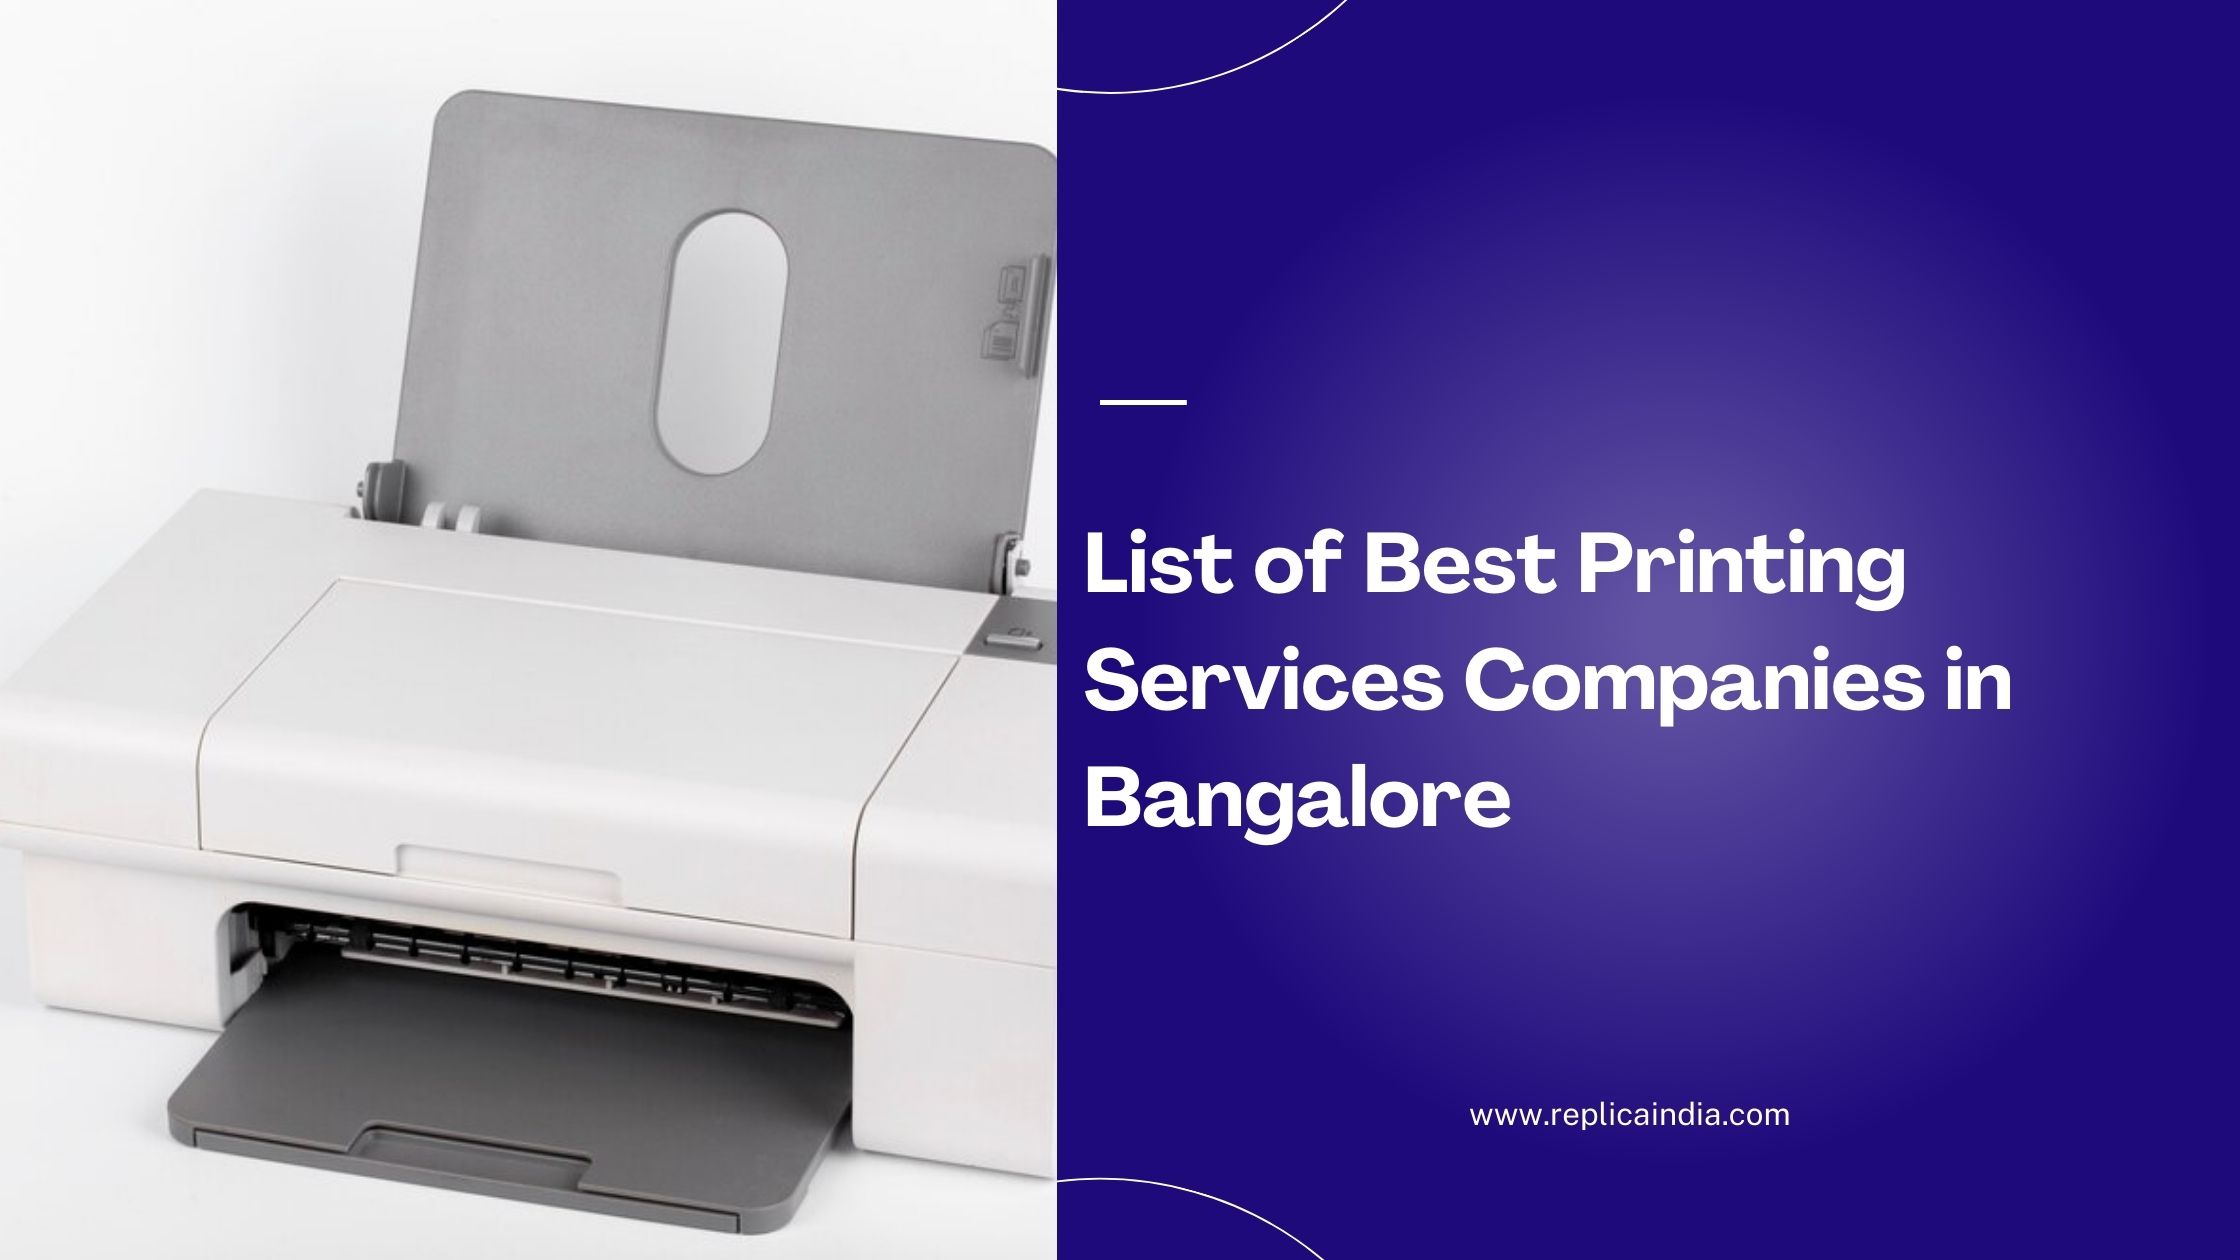 List of Best Printing Services Companies in Bangalore